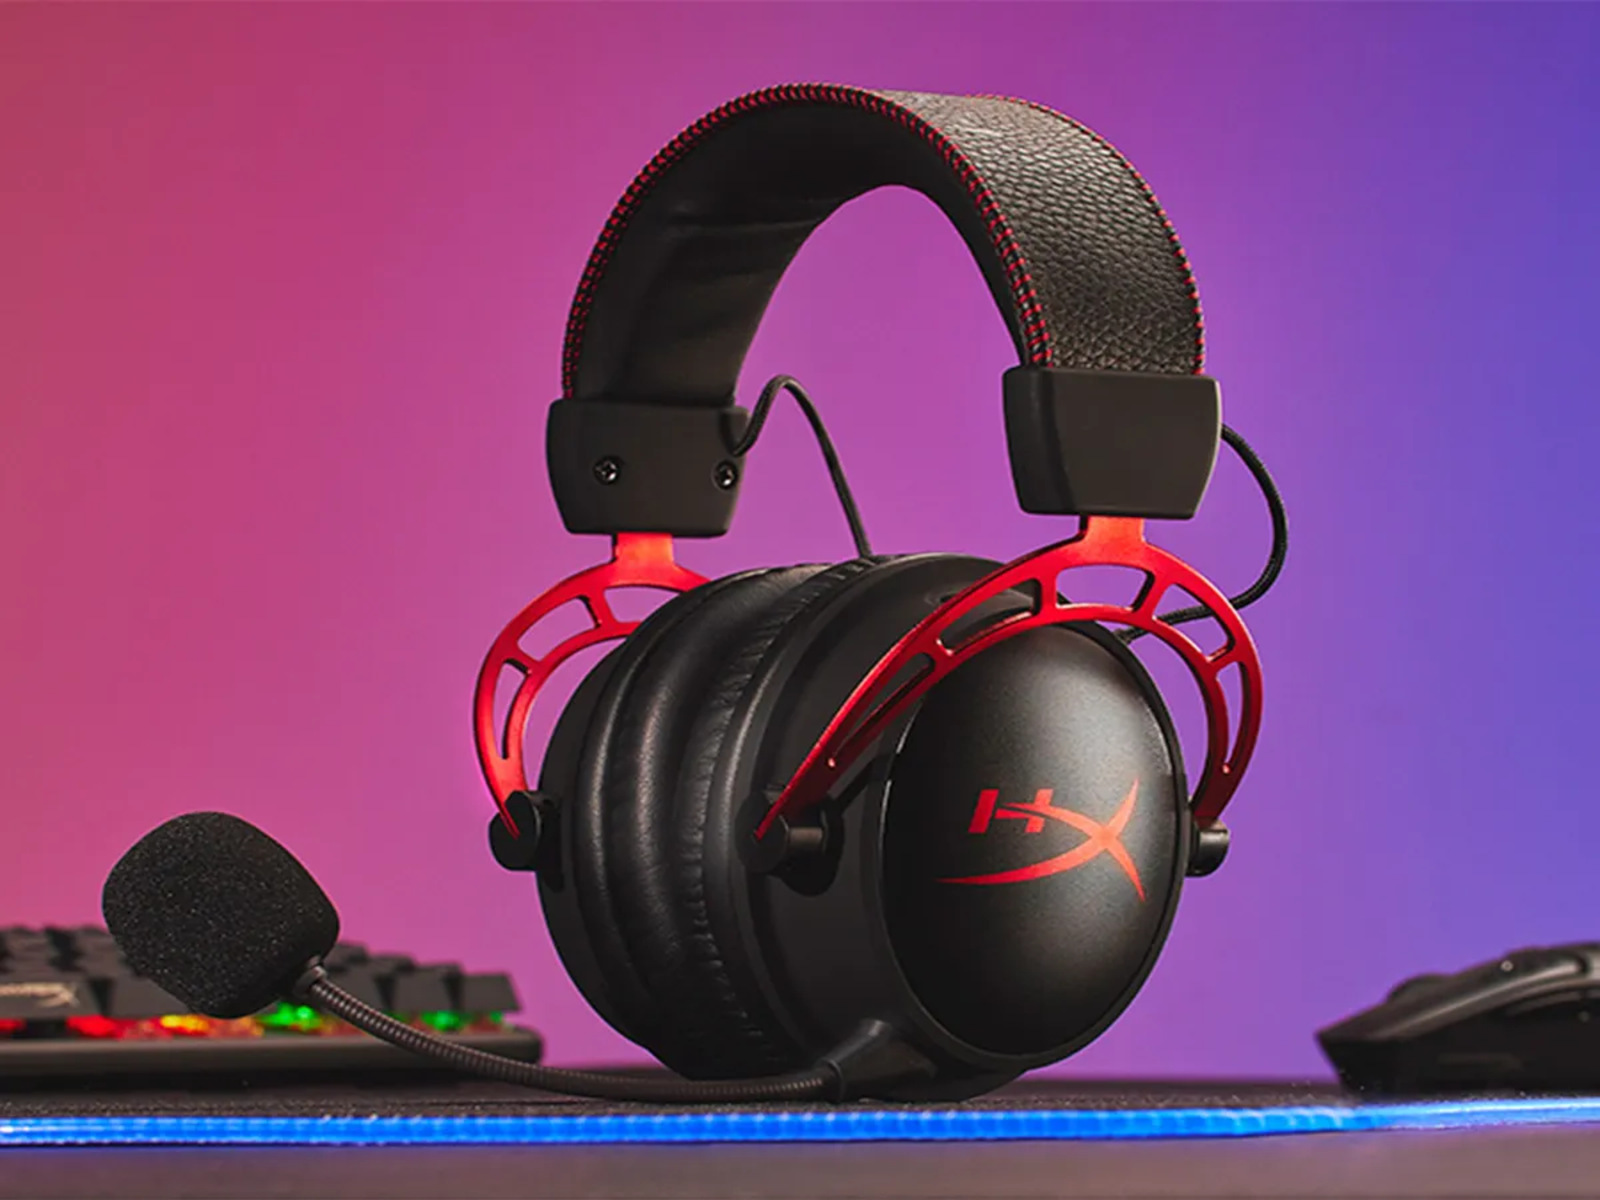 How Long Is The Cord Of The HyperX Cloud Gaming Headset